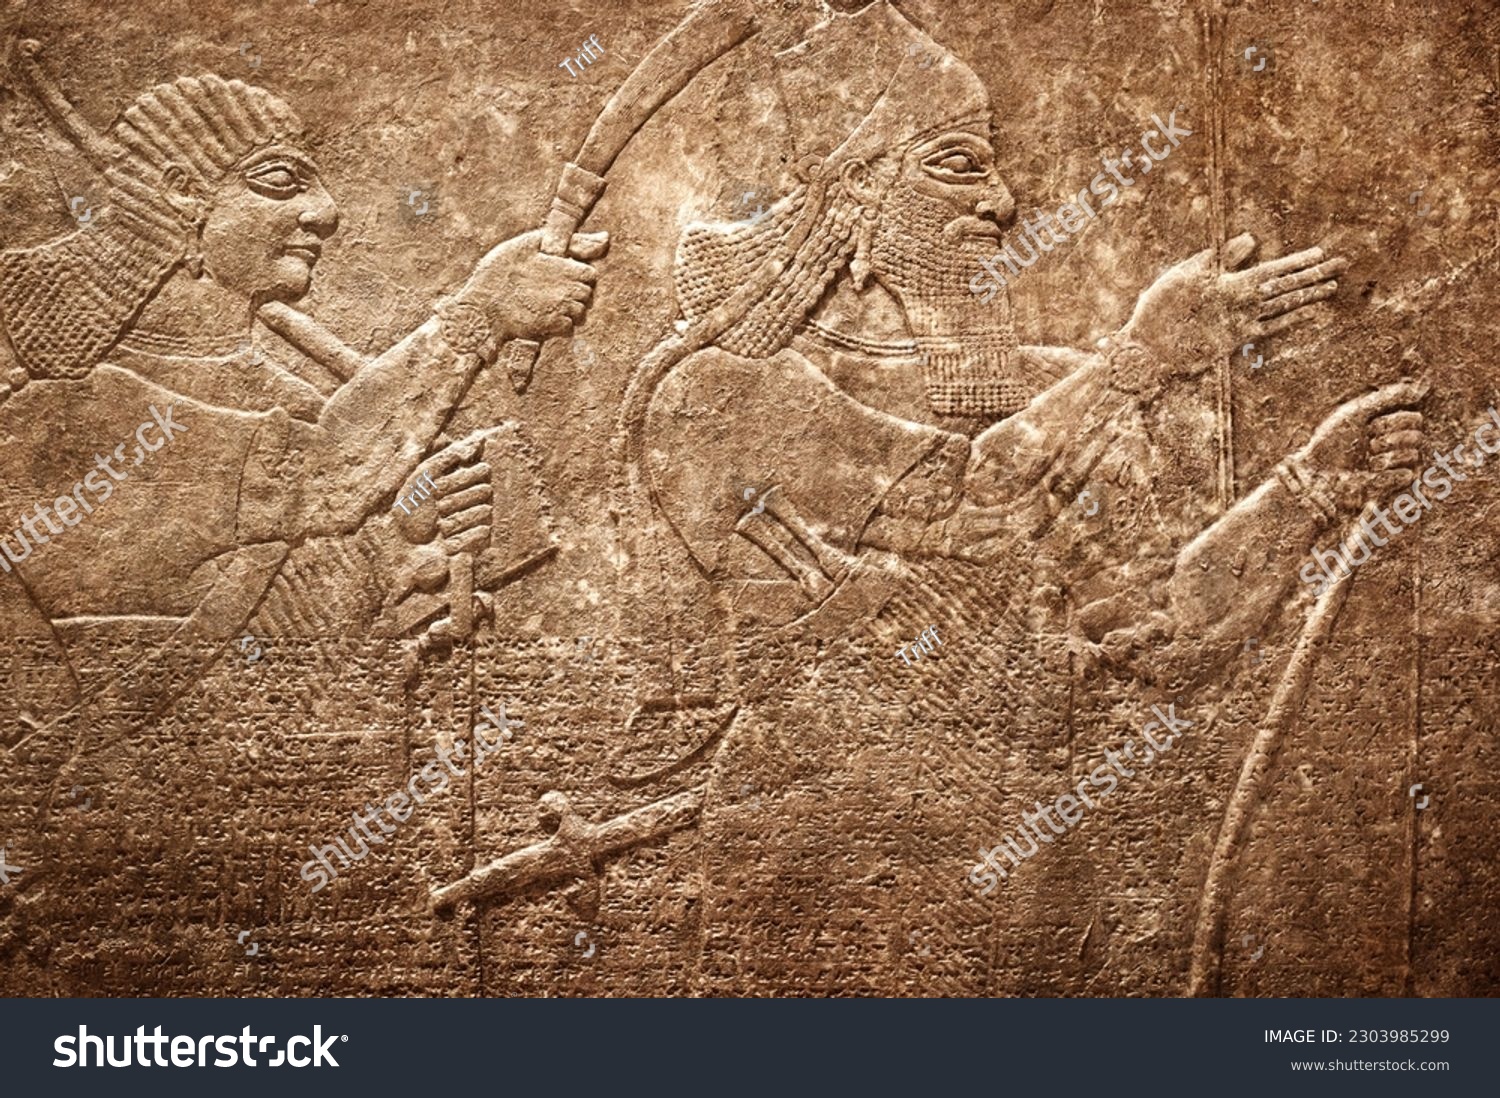 Sumerian wall relief, ancient cuneiform Sumerian text. Historical background on the theme of civilizations of Assyria, Mesopotamia, Babylon, interfluve, Sumerian. Overlay effect on old paper texture. #2303985299